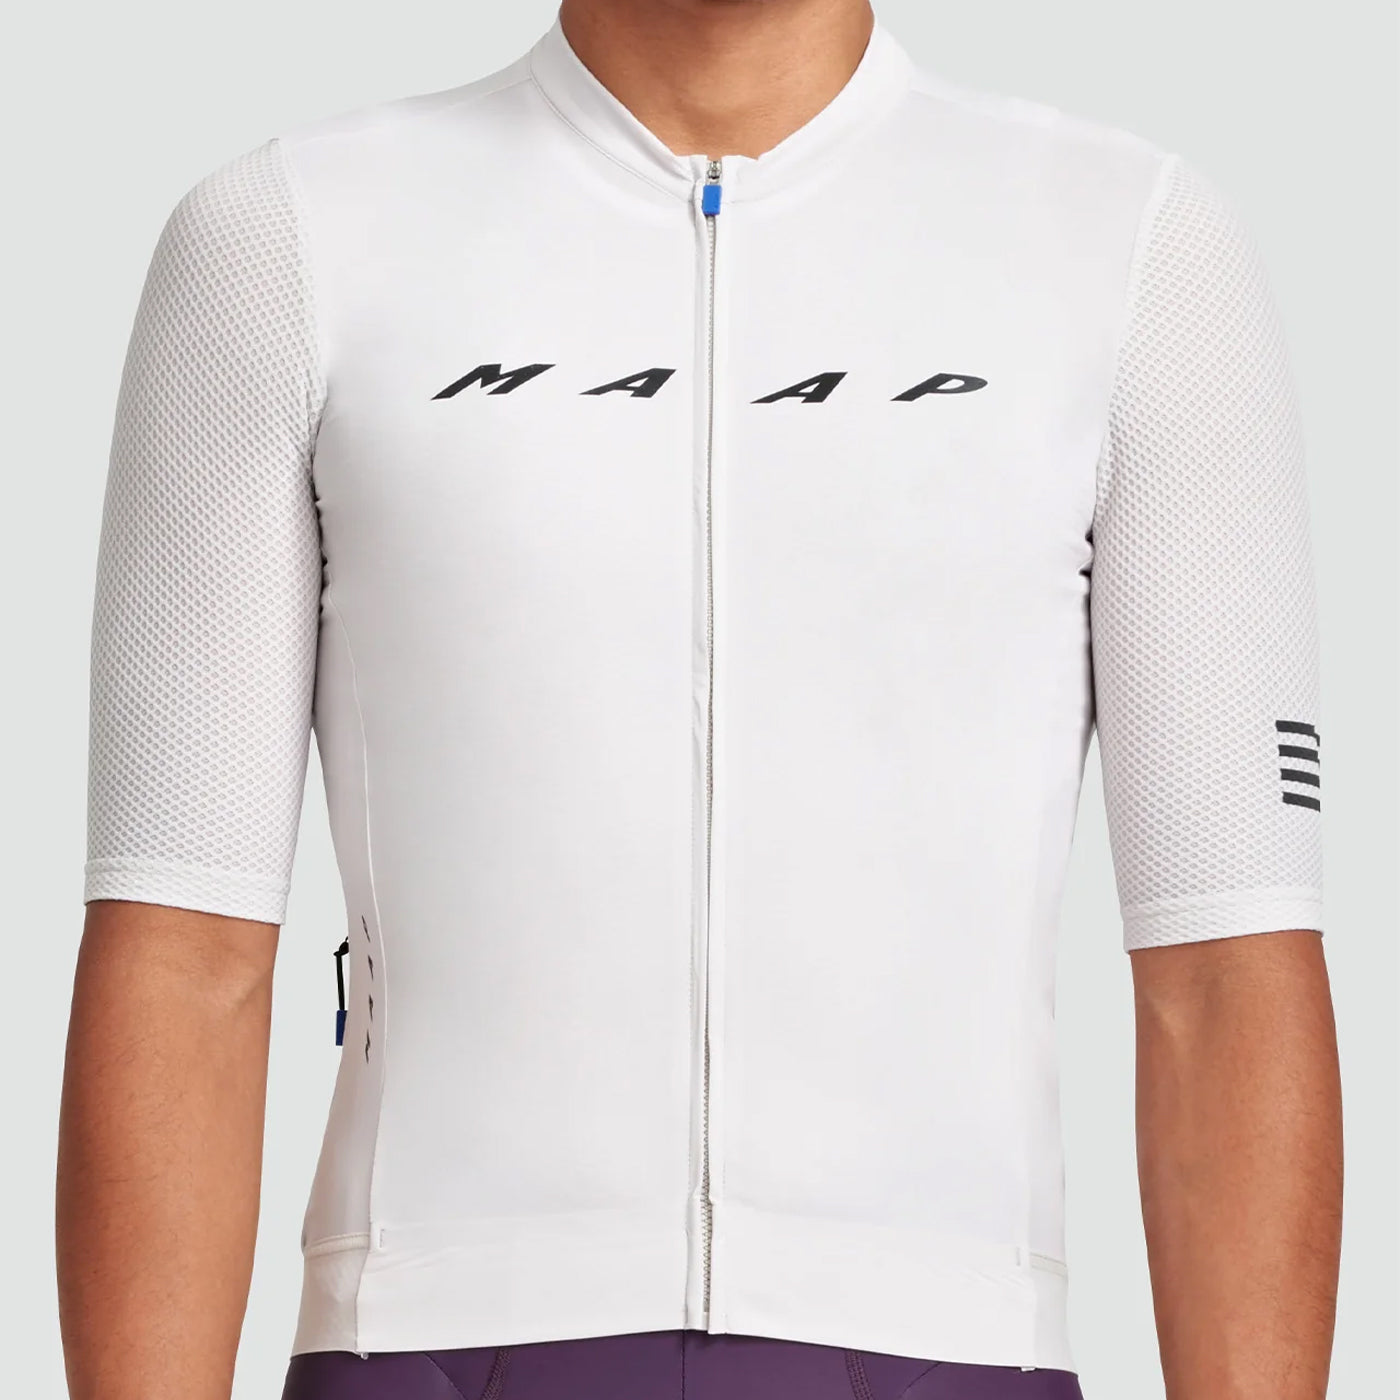 Maap Evade Pro Base 2.0 jersey - White | All4cycling